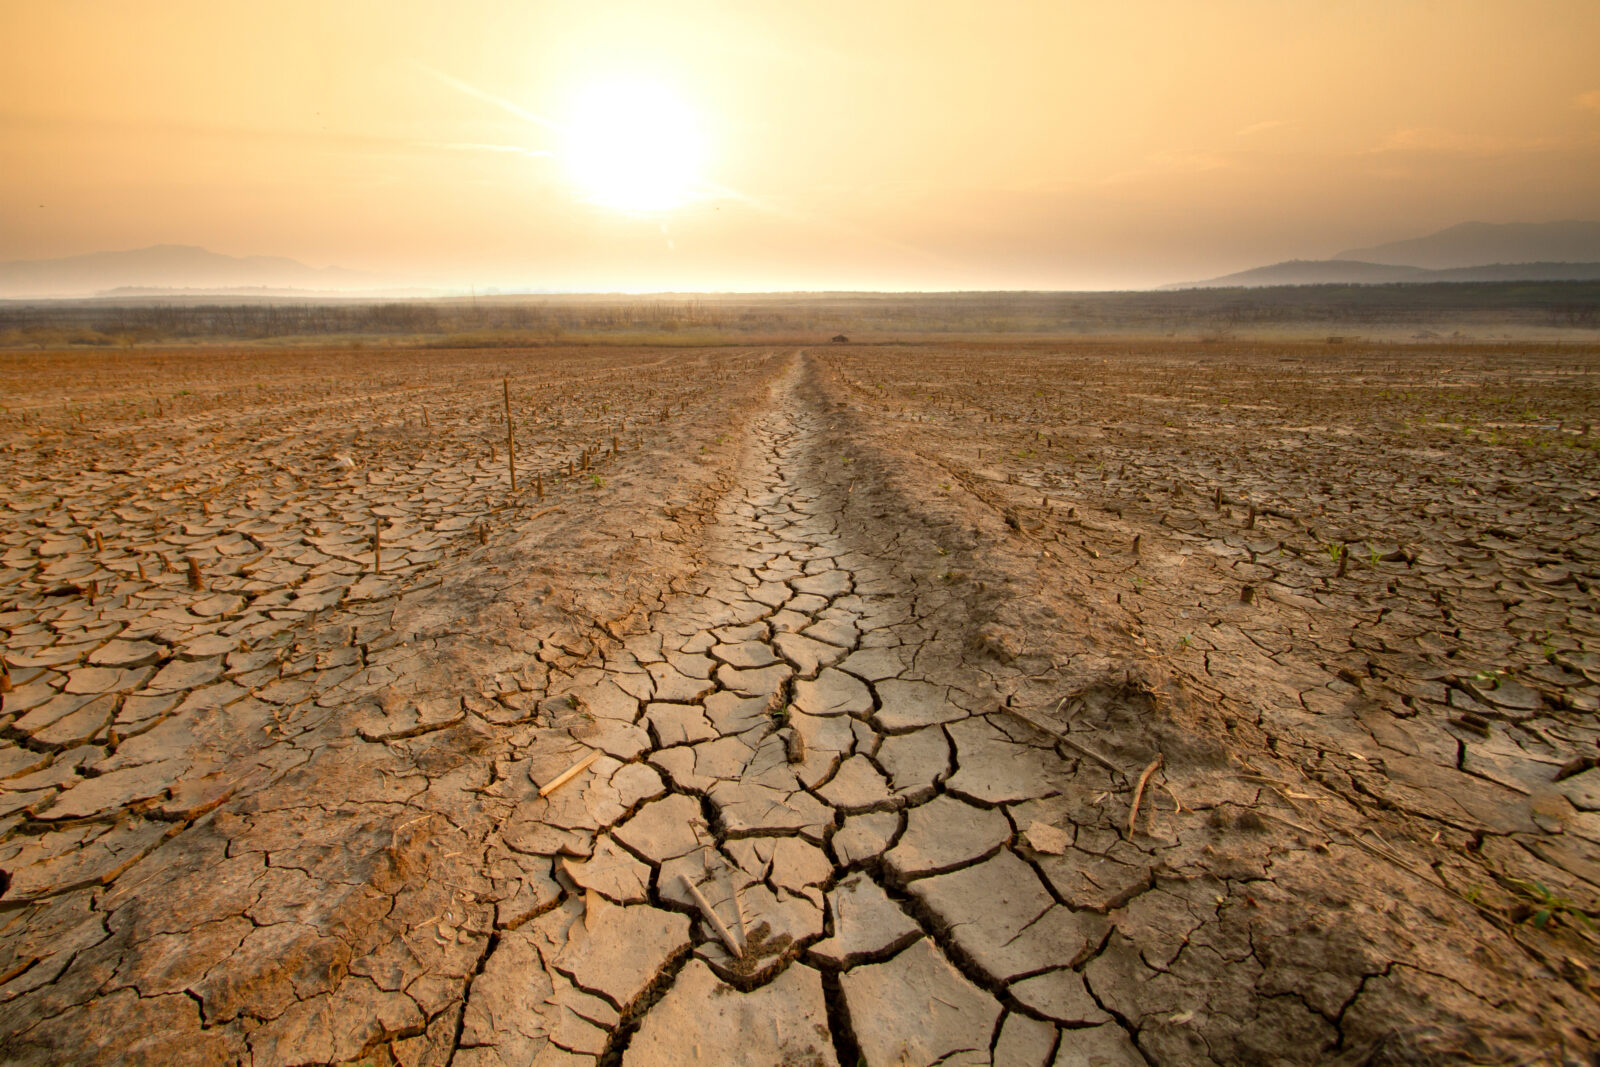 Drought and climate change